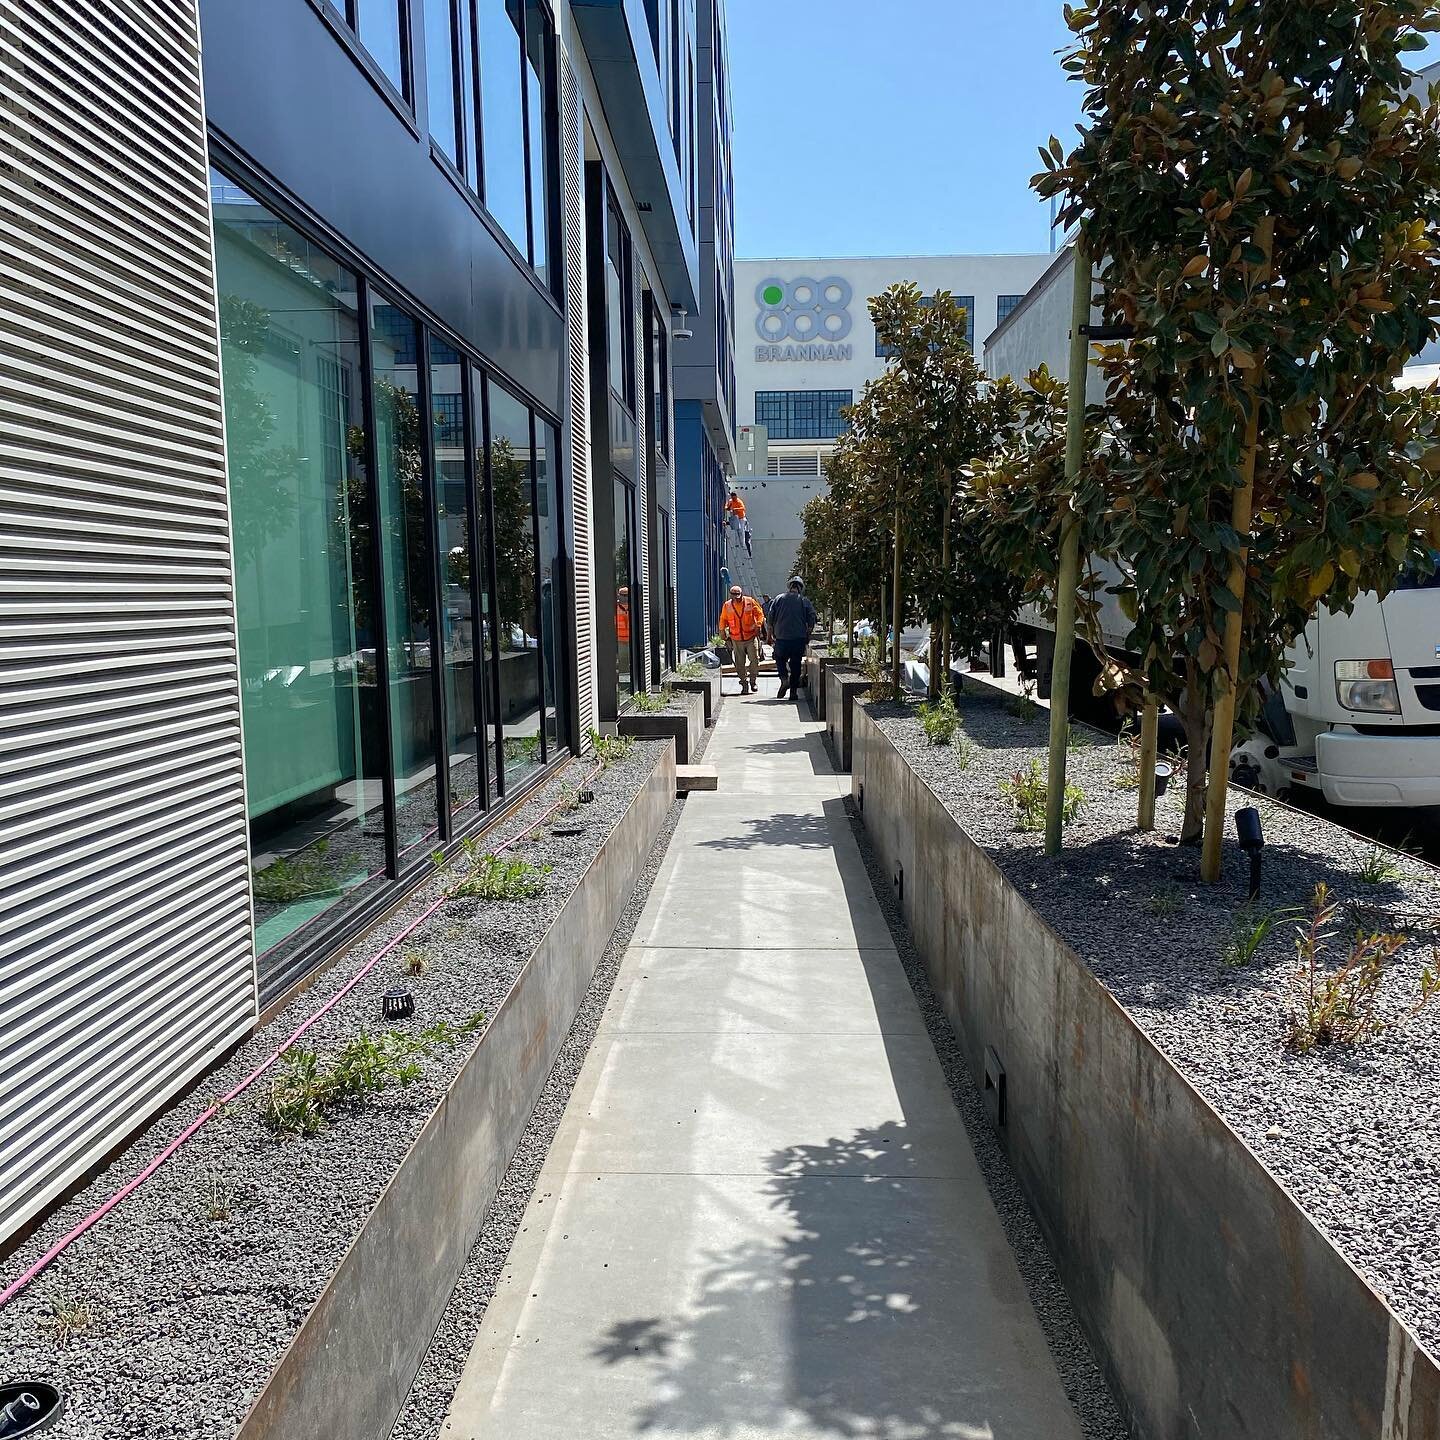 Sometimes it can be a challenge to find space for plants in dense urban streetscapes, but we know vegetative infrastructure helps increase walkability and provides wildlife corridors for important pollinators. Check out these steel planters on podium